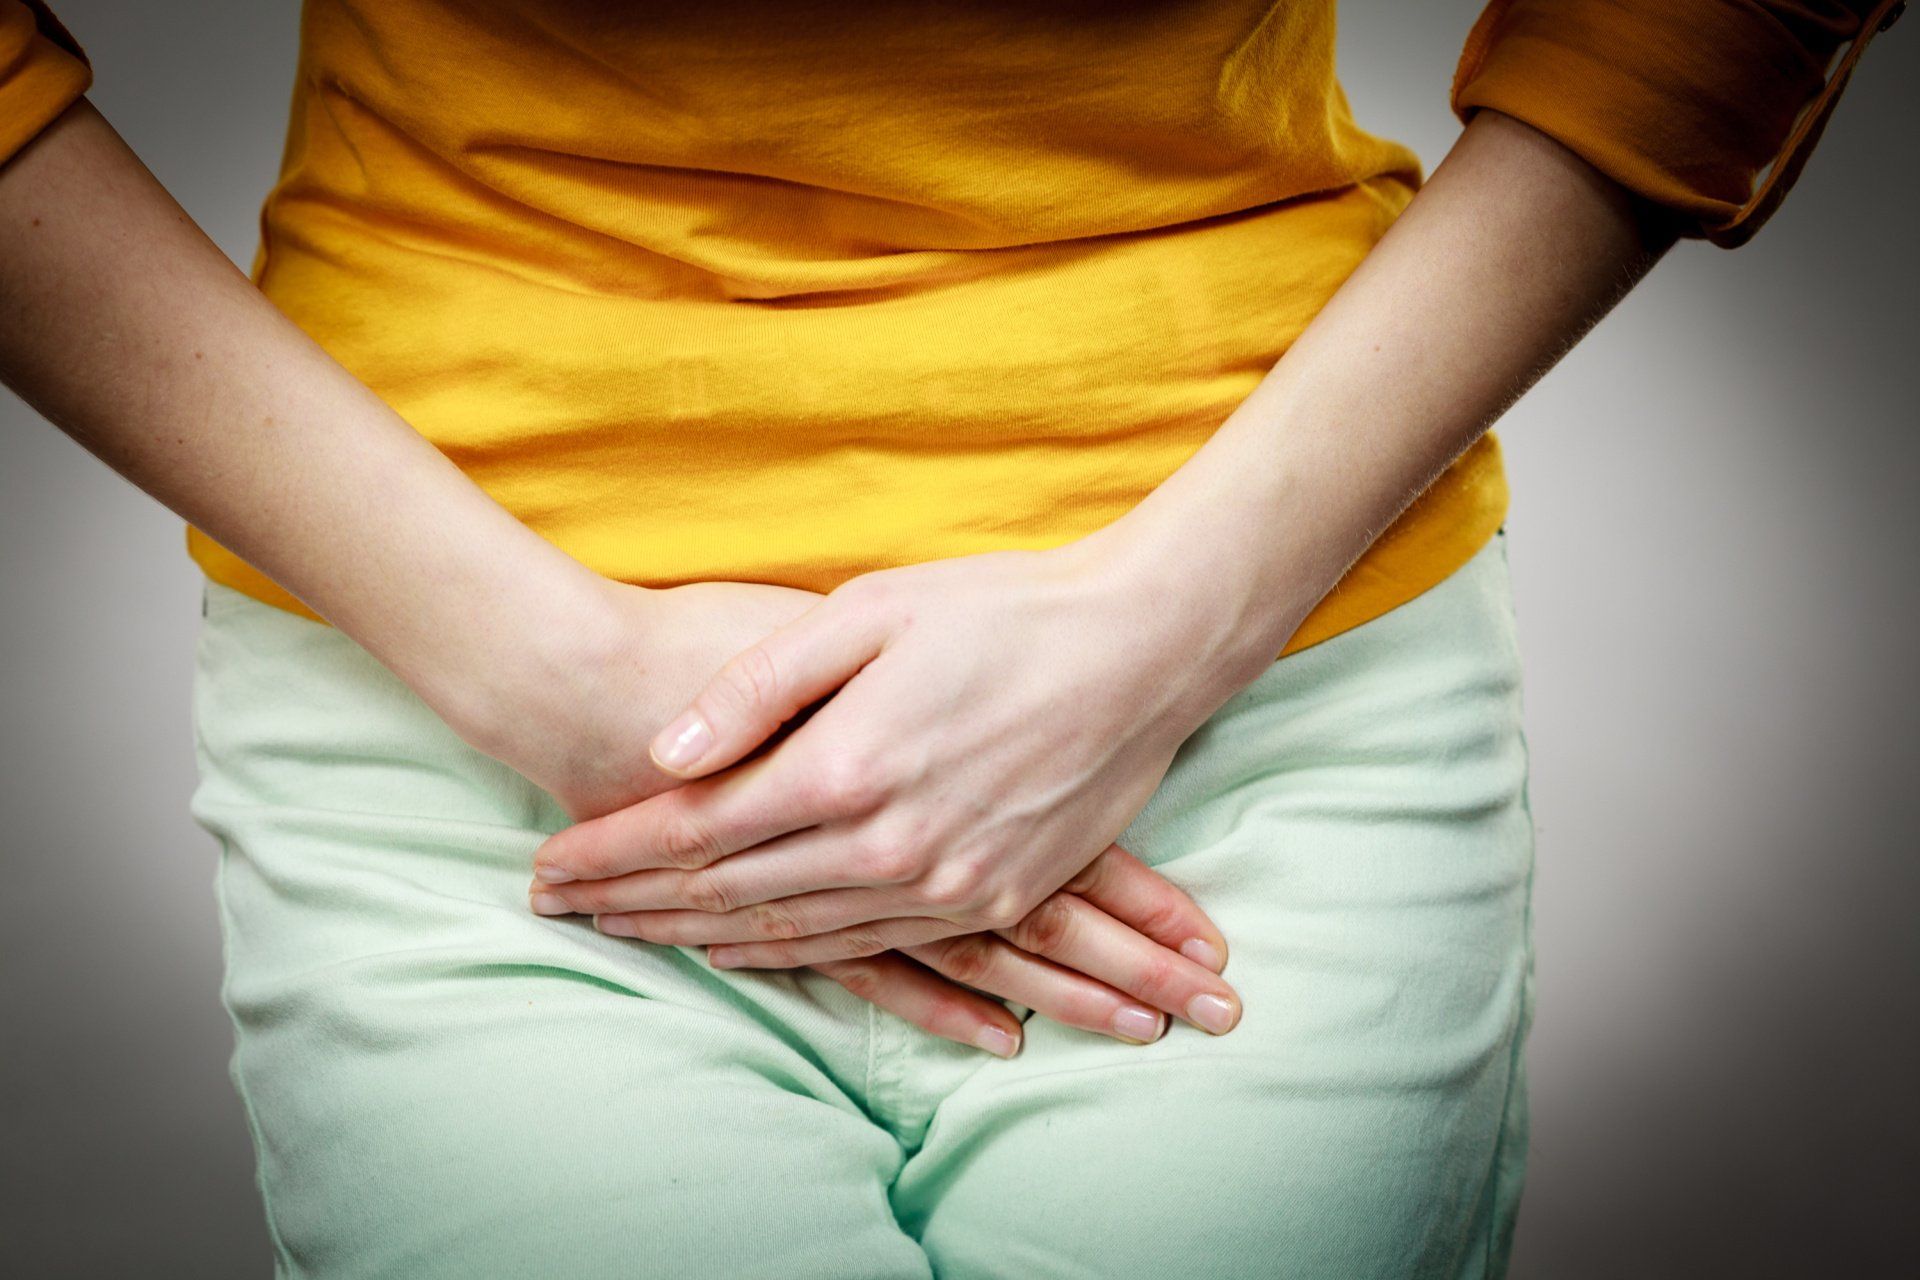 What are the Symptoms of Urinary Tract Infection and the Treatment for Urinary Tract Infection?